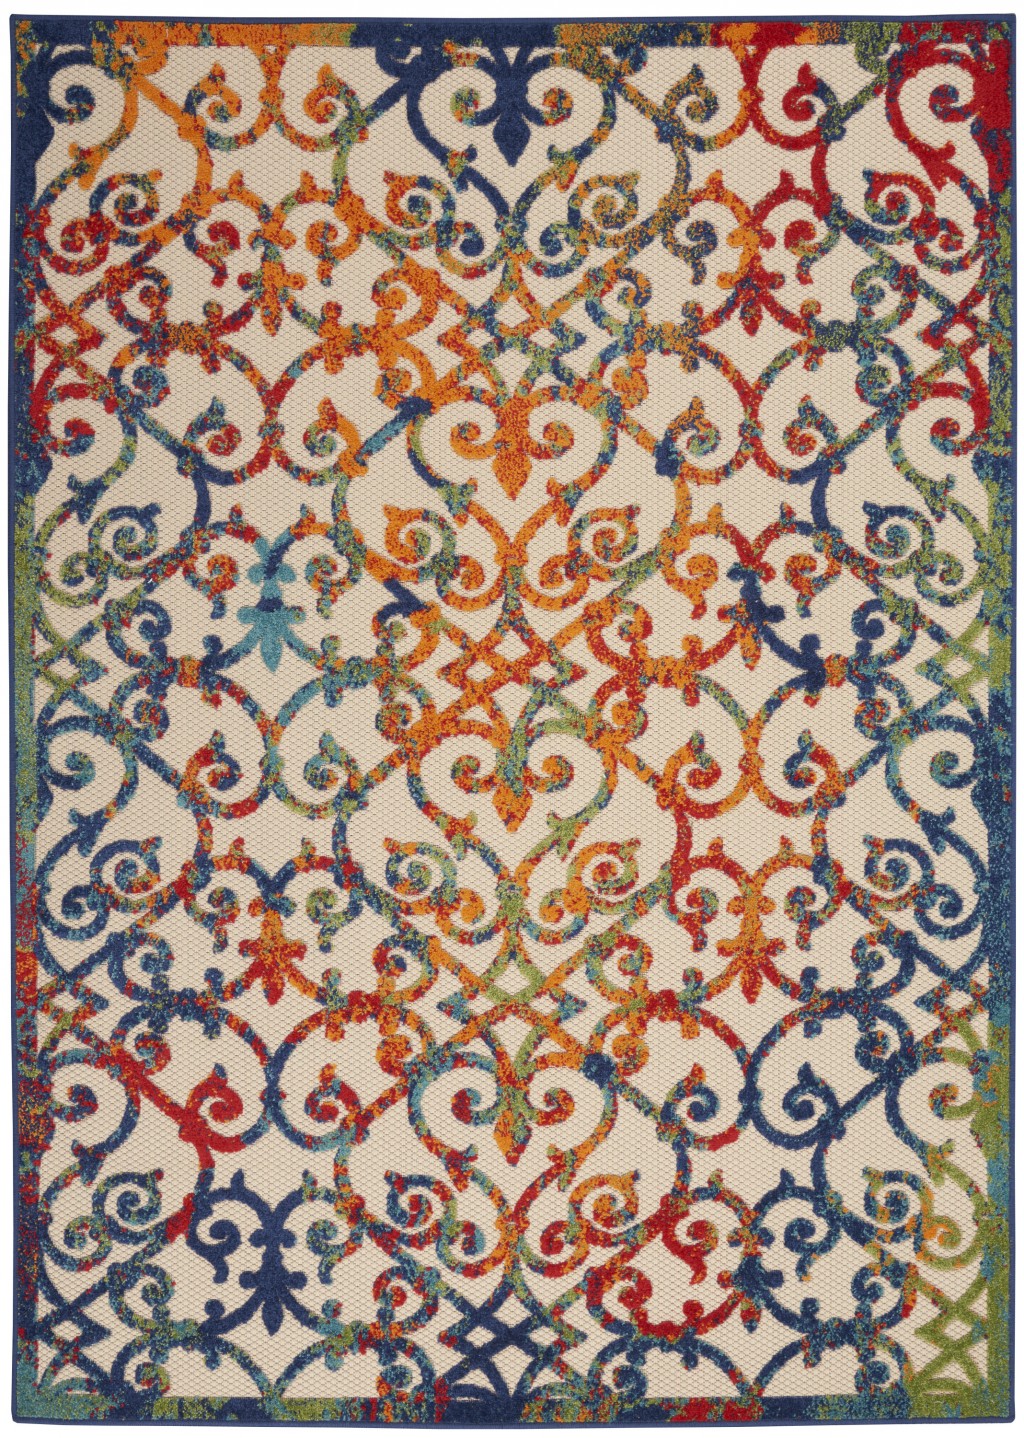 4' X 6' Ivory And Blue Floral Indoor Outdoor Area Rug-385029-1